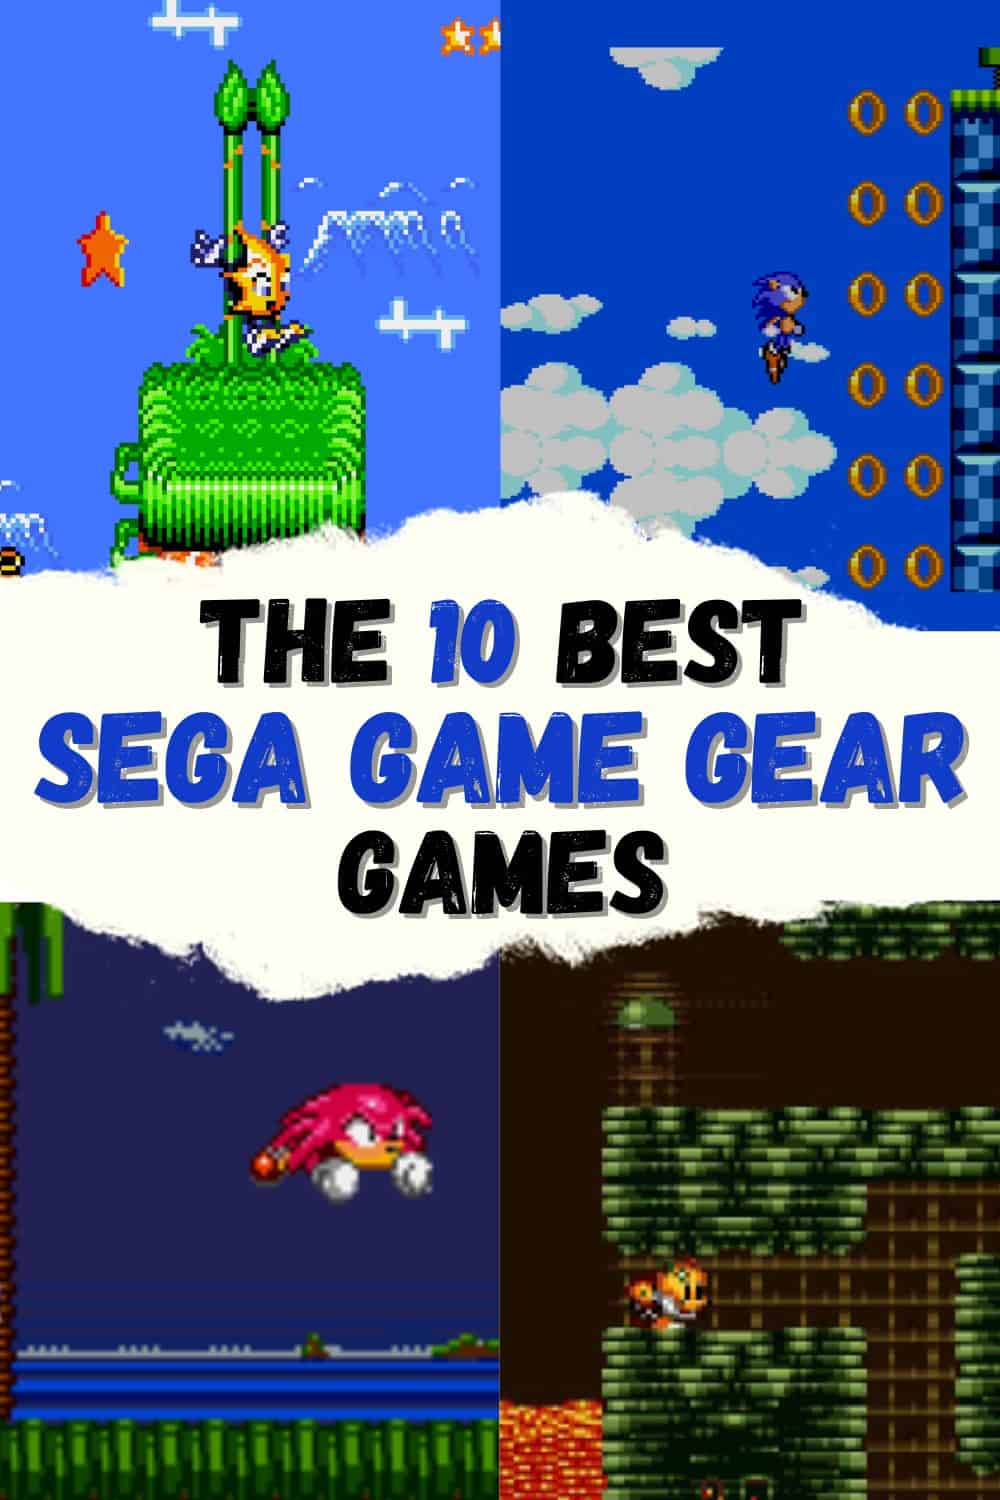 What is the best game for Sega Game Gear?